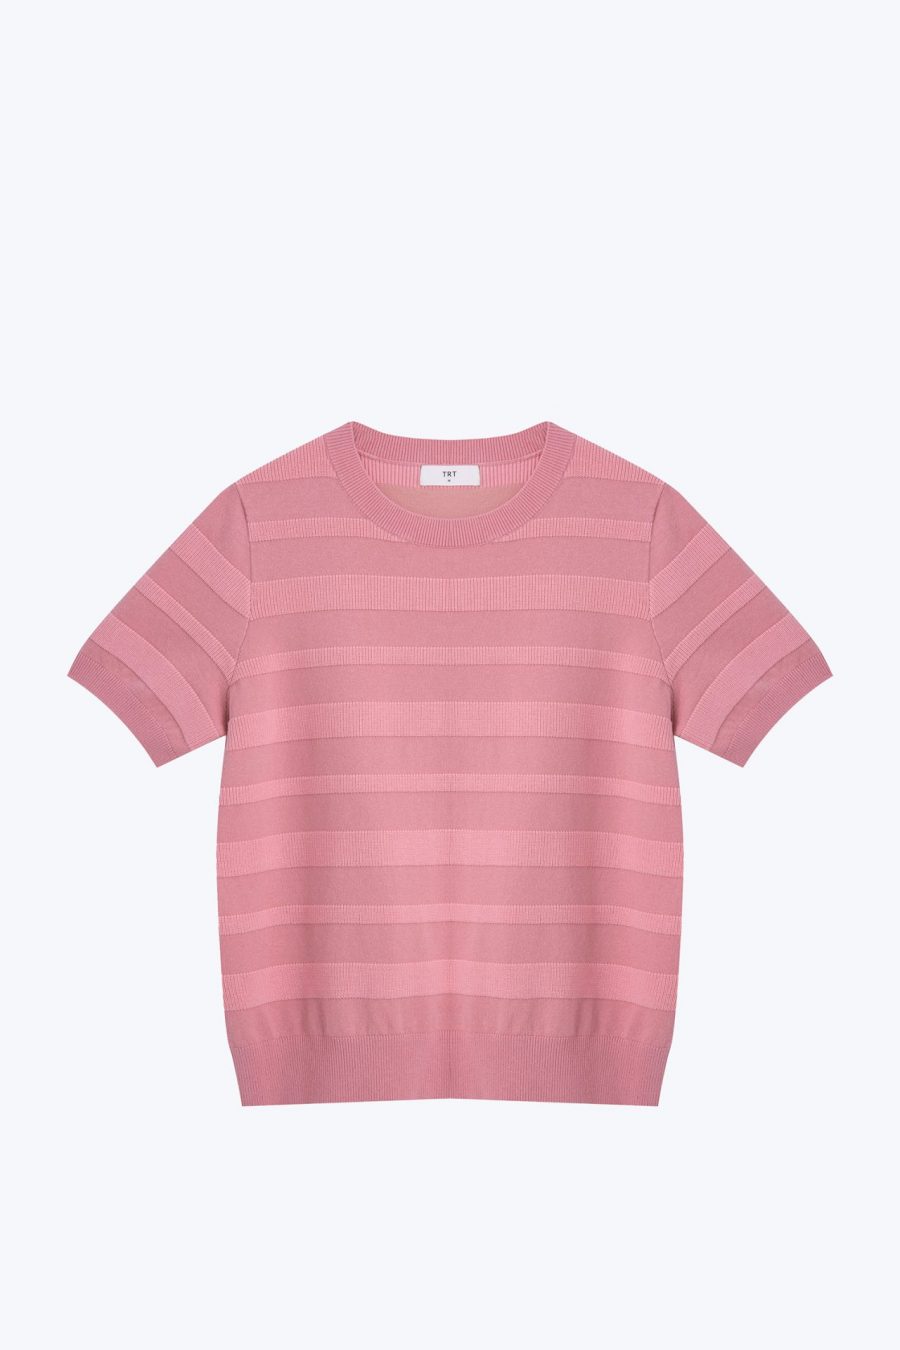 CK001228S Knitted Striped Short Sleeve Top BLUSH